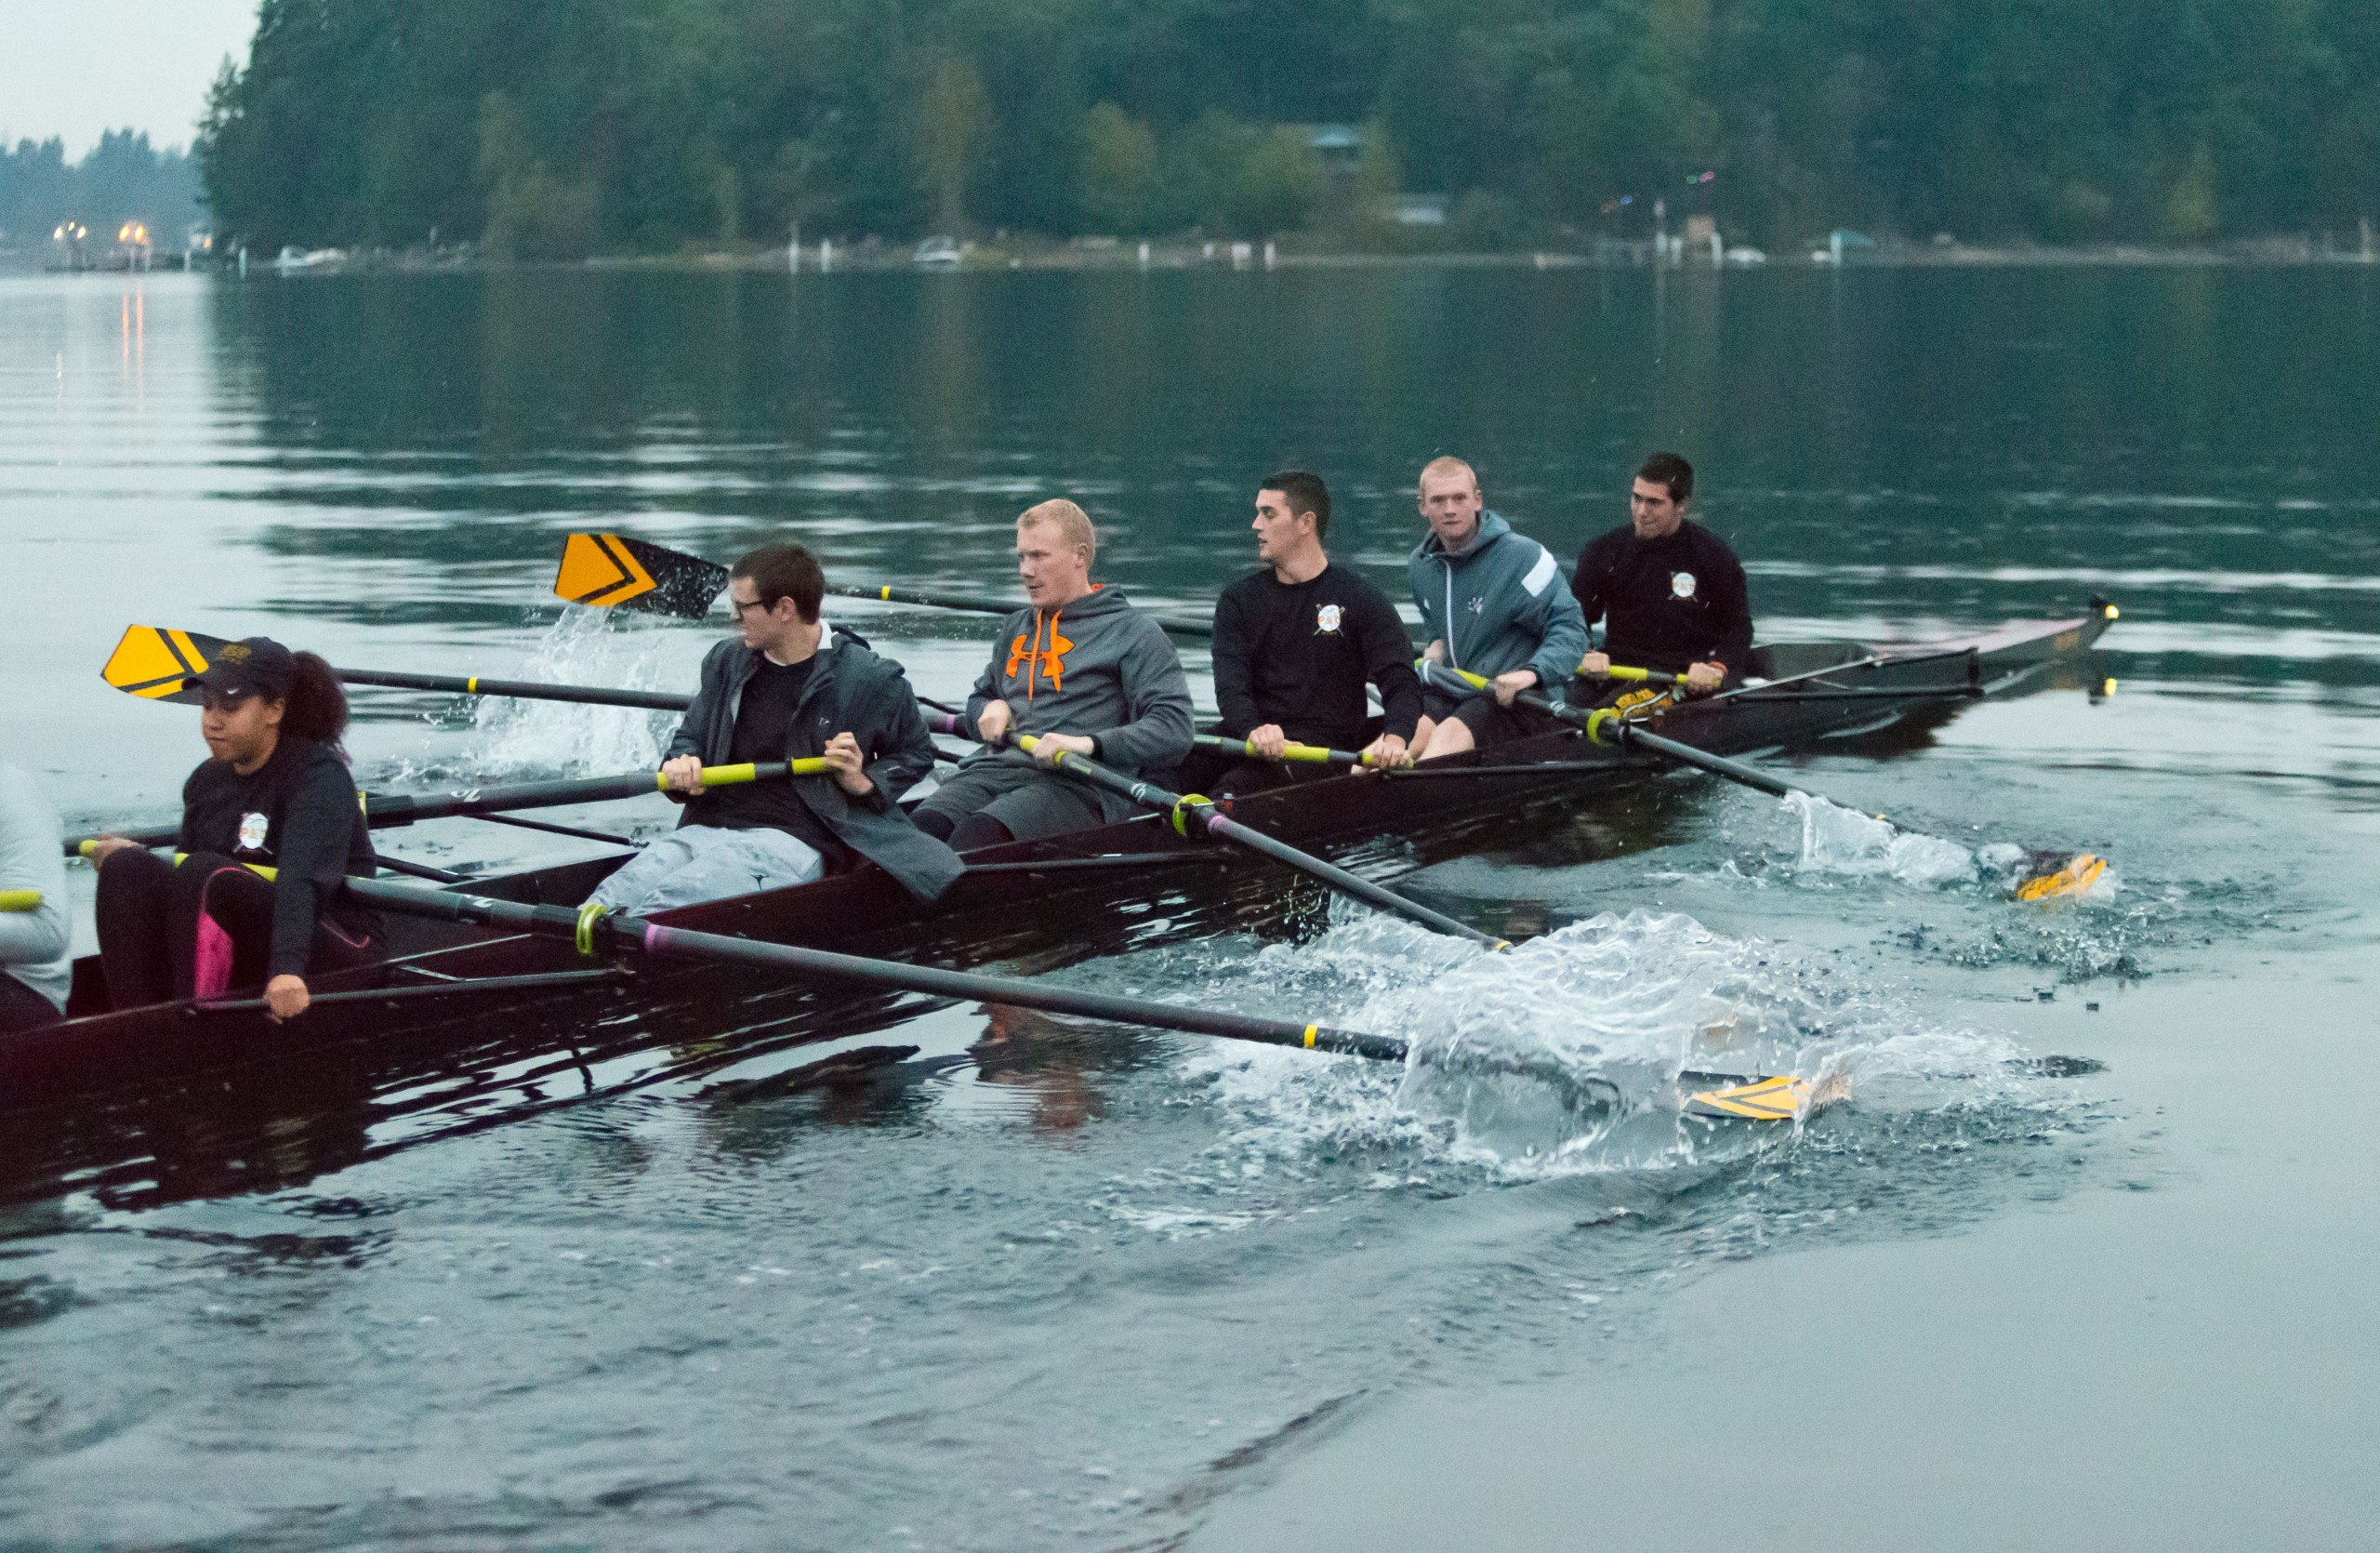 Men's basketball team joins the women's crew team to learn and experience a workout at American Lake on Wednesday, Oct. 7, 2015. (Photo/John Froschauer)